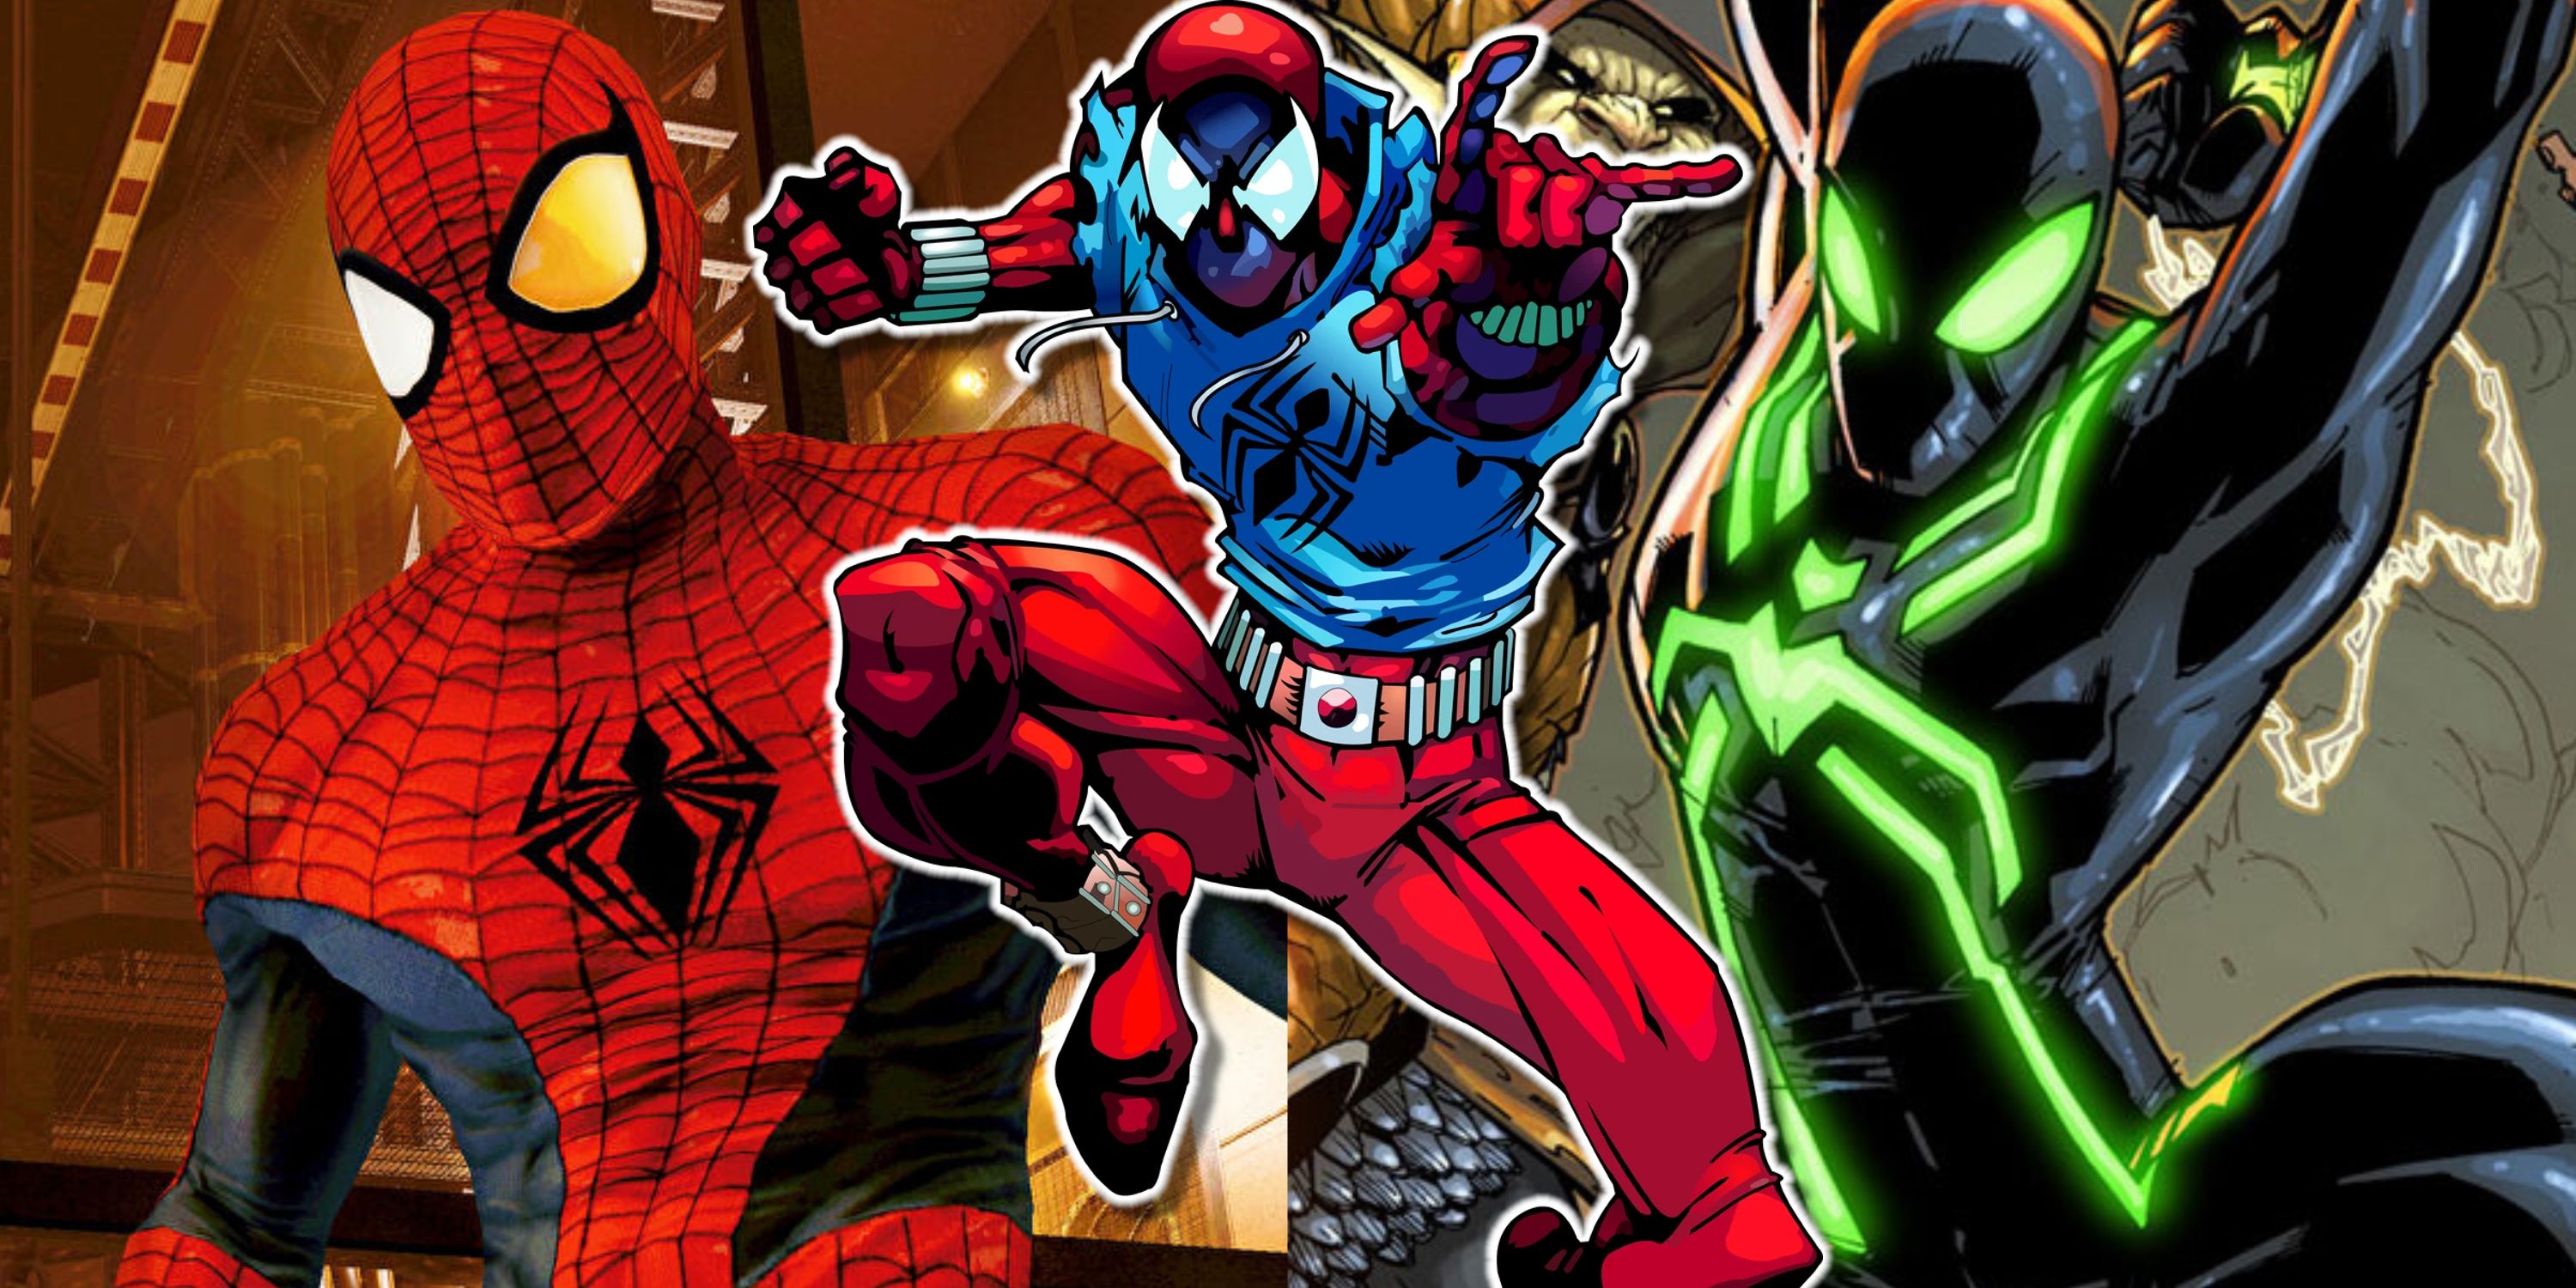 Split image of Spider-Man in Edge of Time video game, and Scarlet Spider and Big Time Spider-Man from the comics